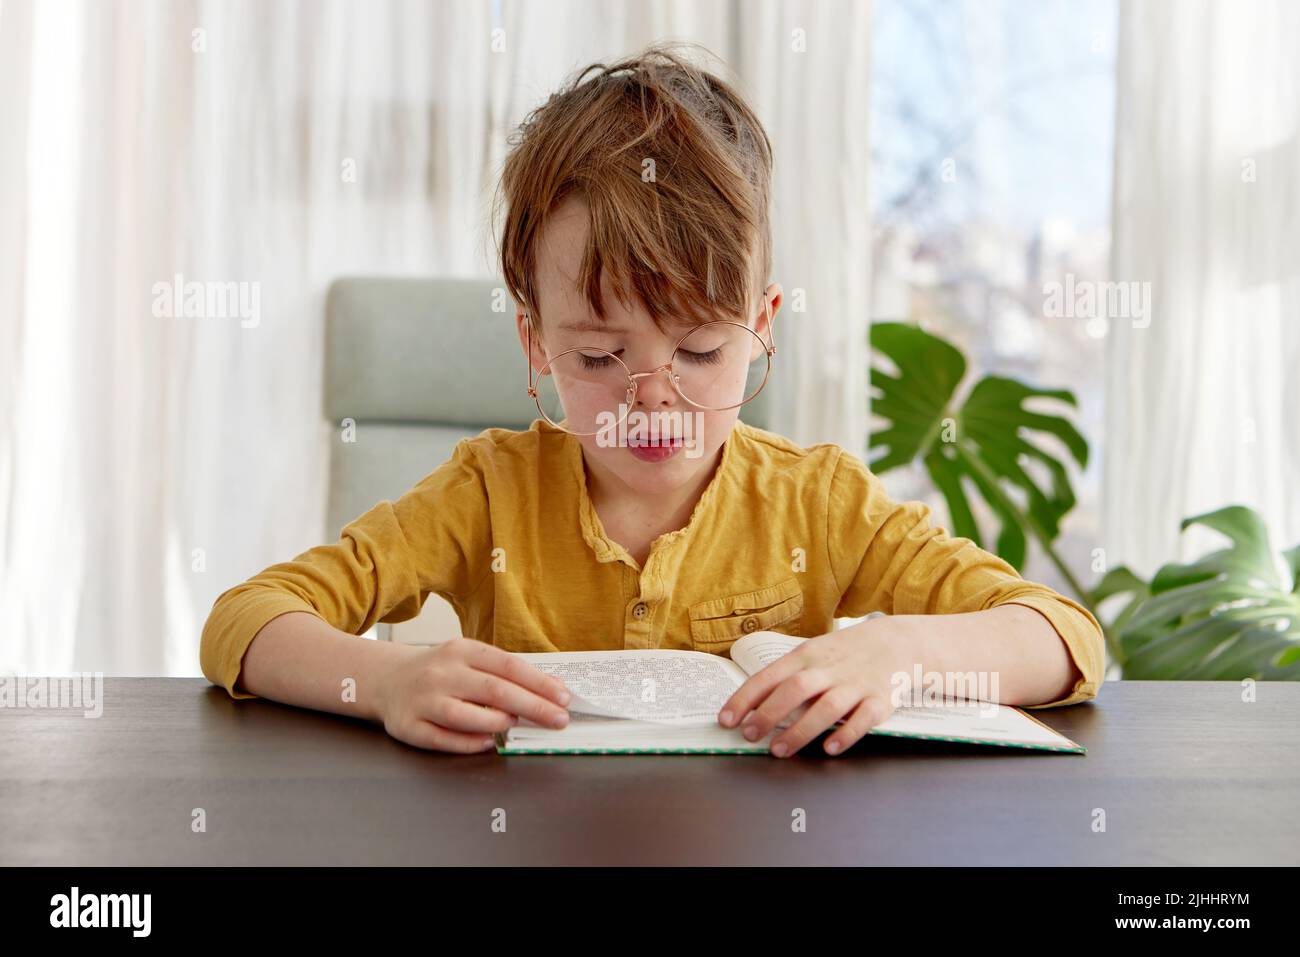 Kid sitting on chair reading a book, wearing glasses Stock Photo